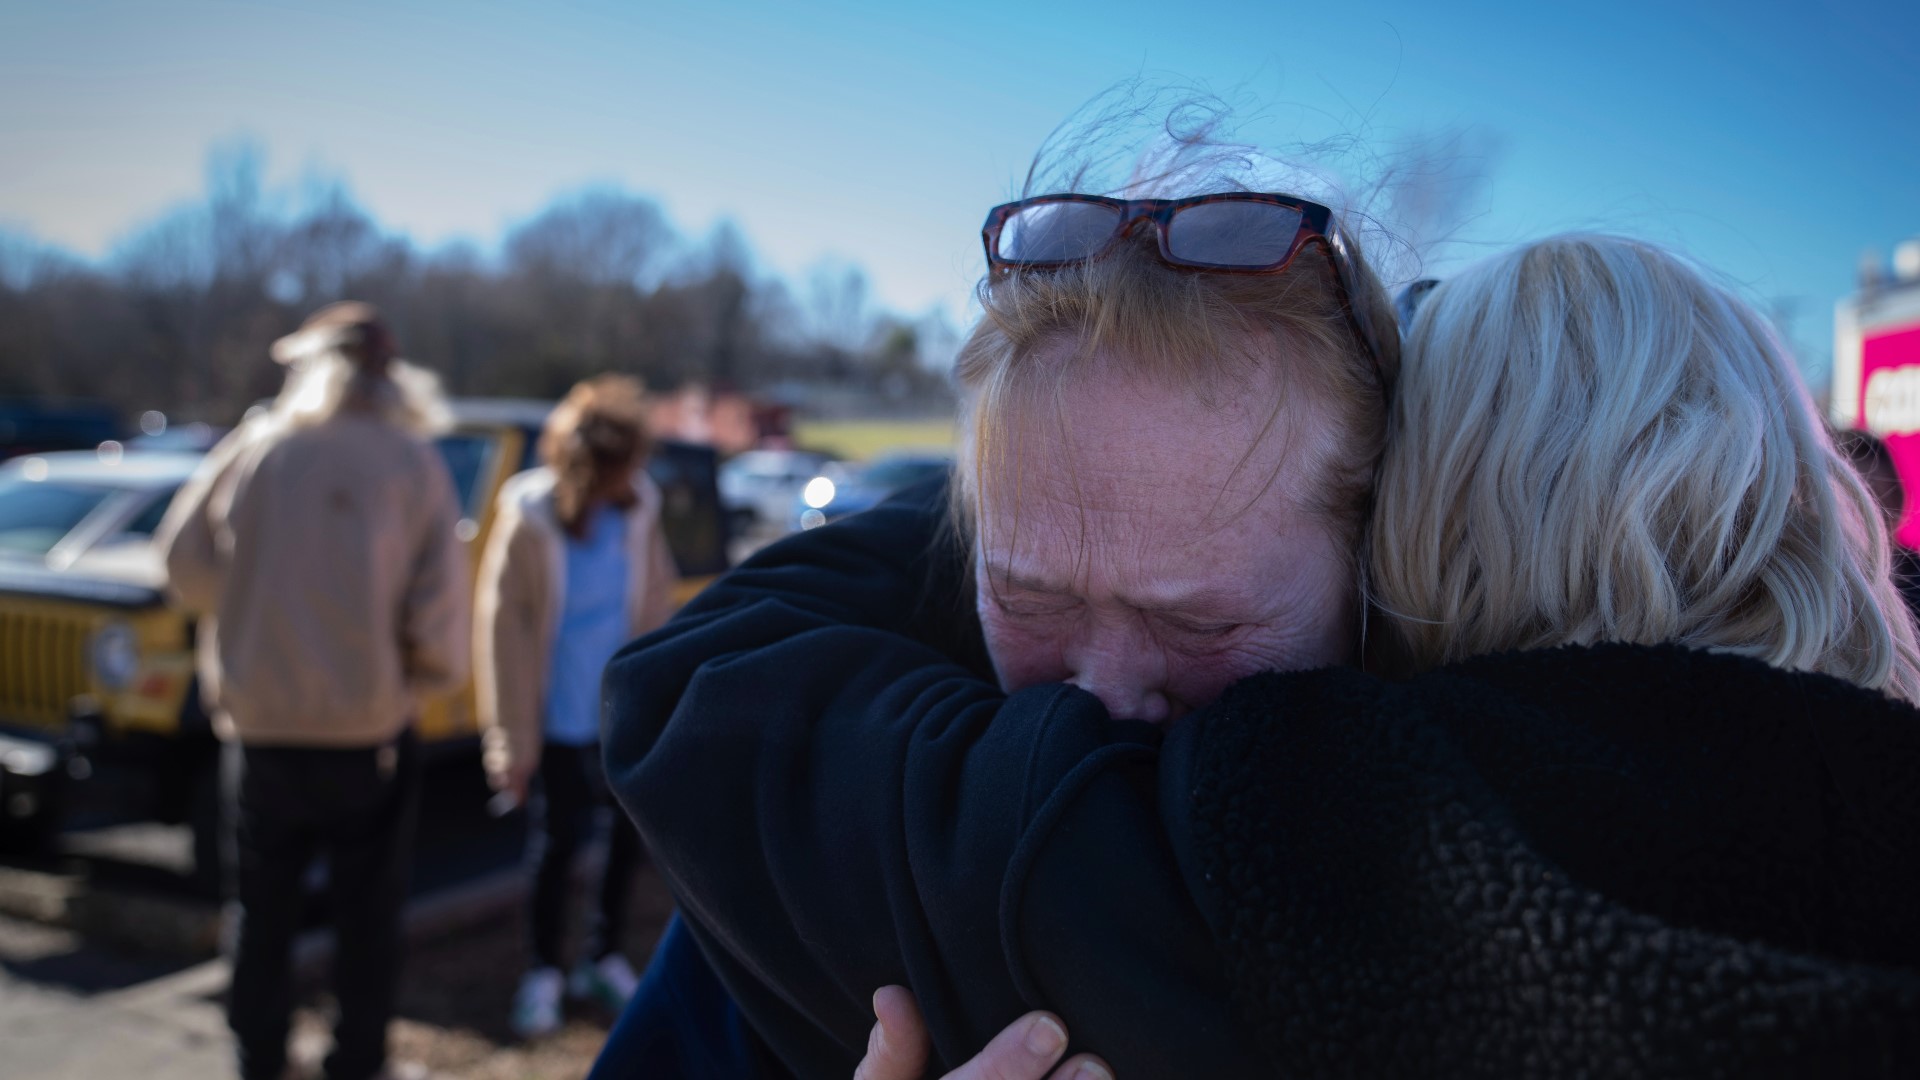 'This tornado devastated the poorest people in our community... they're telling me this is the worst thing they've ever lived through--they've lost everything.'